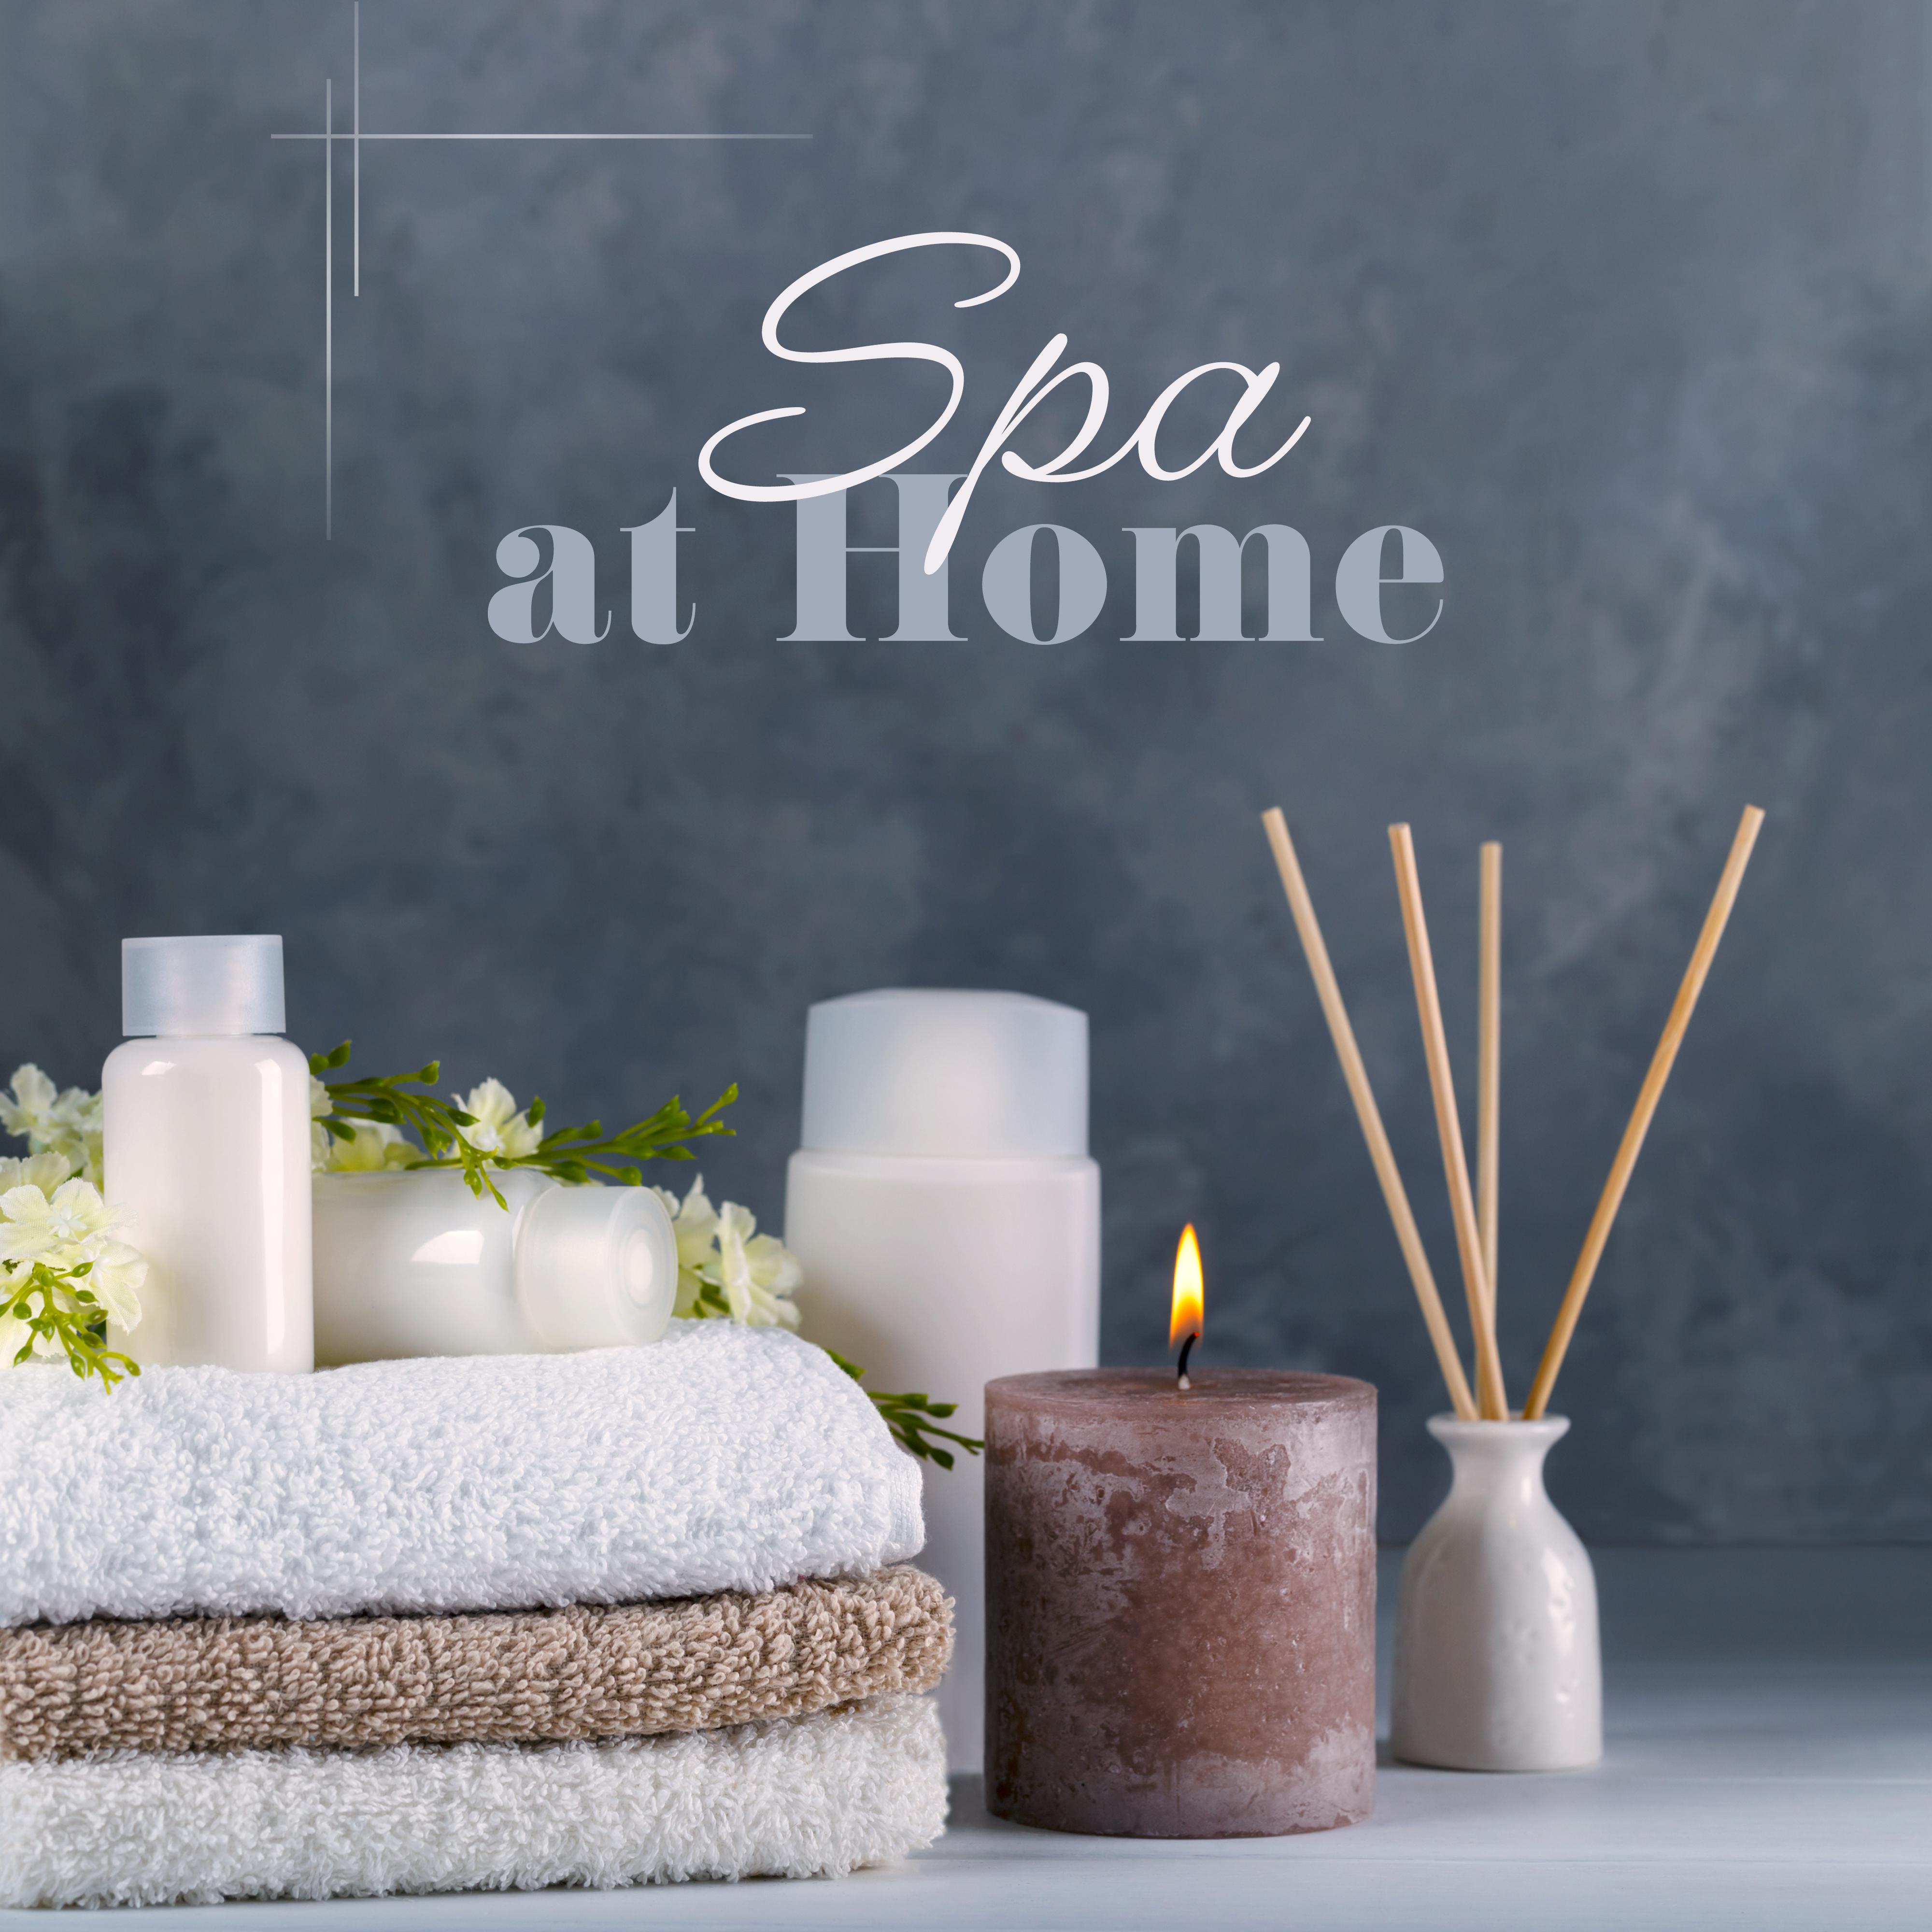 Spa at Home - Home Set of Relaxation Music for Bathing, Relaxation and Spa Treatments